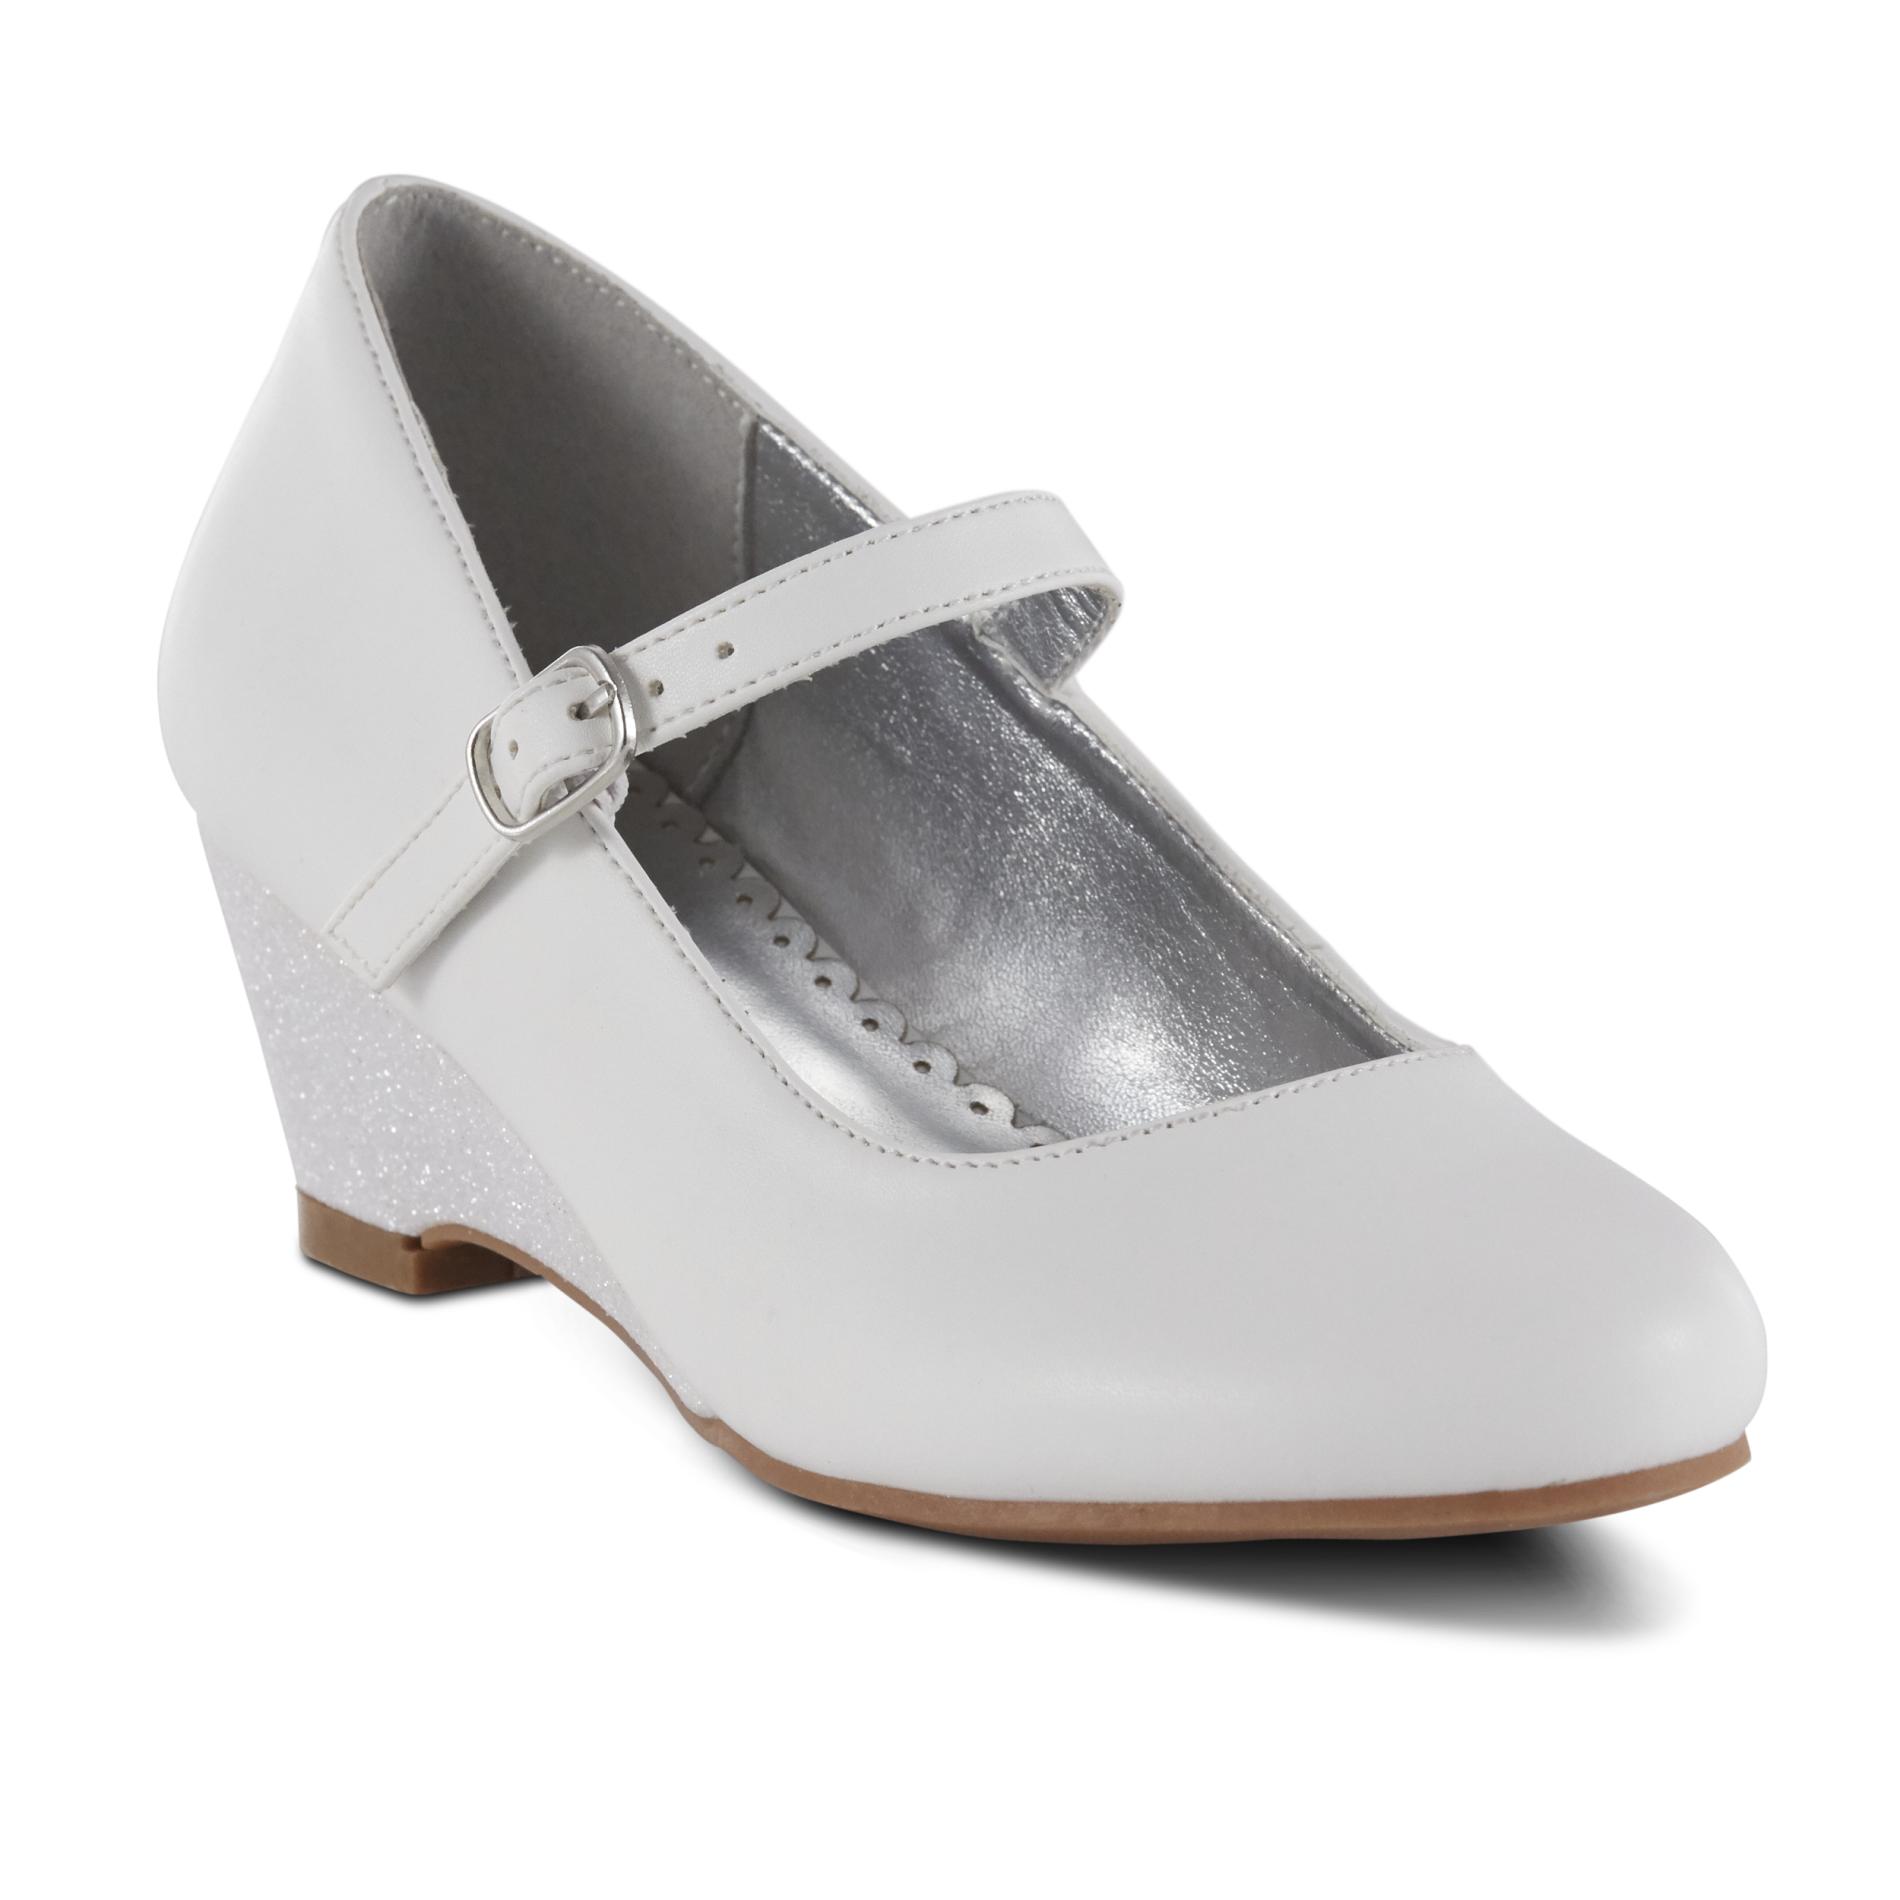 Dress Girls' Shoes: Youth - Sears